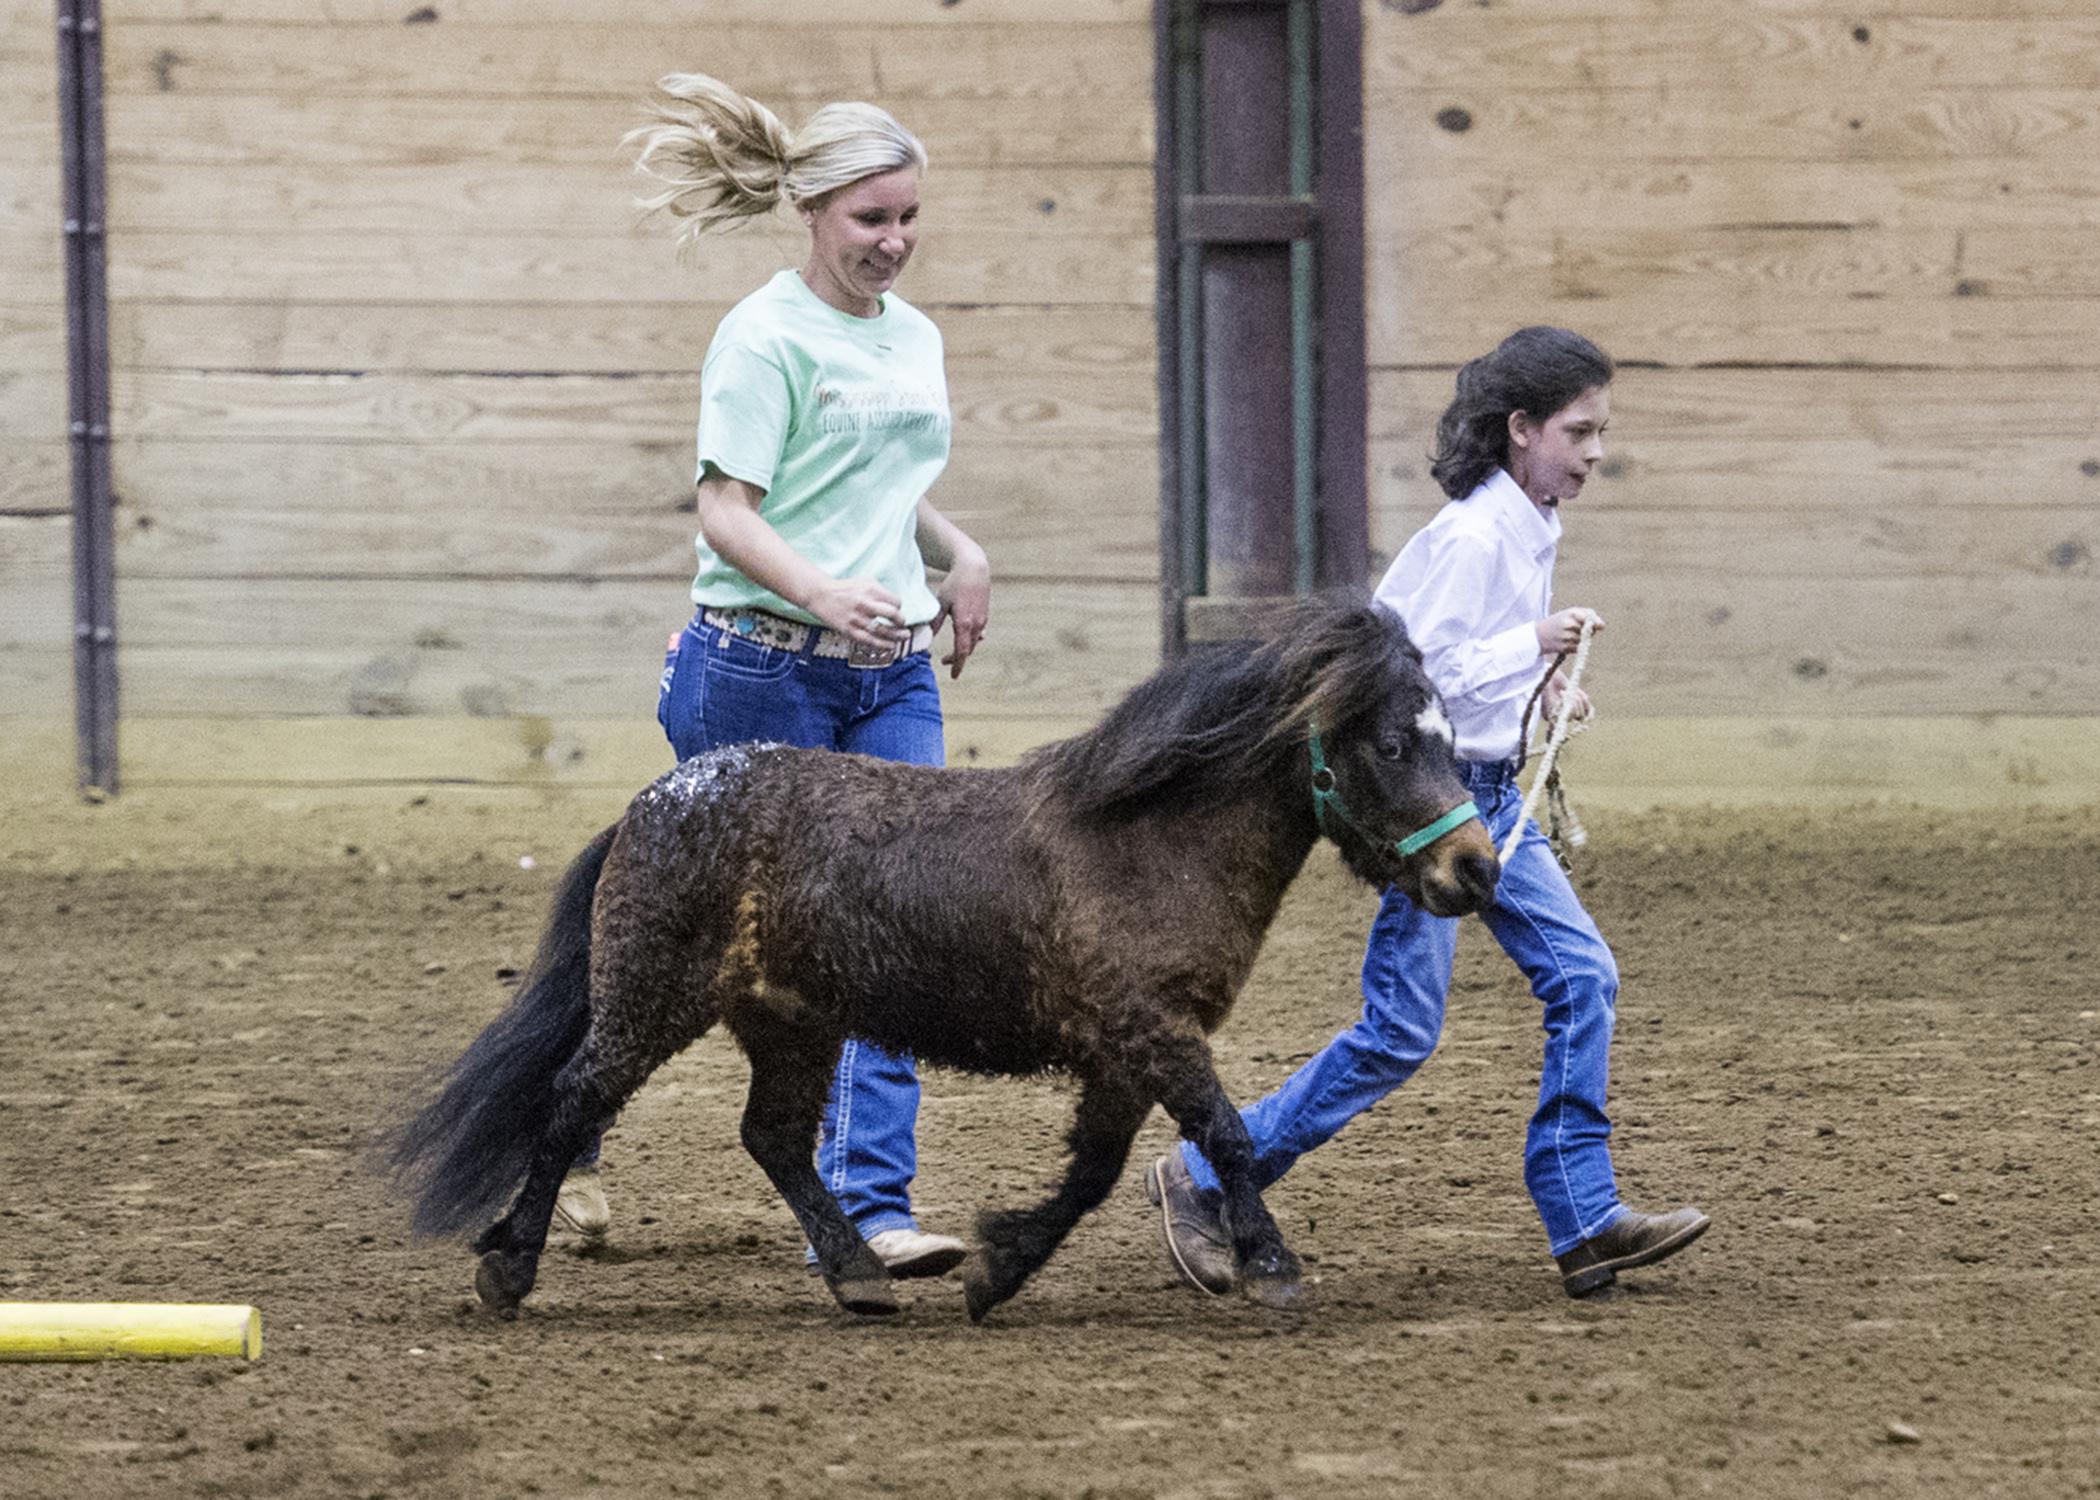 Cassie Brunson, coordinator of the Mississippi State University Extension Service Therapeutic Riding and Activity Center, runs beside Little Sam, led by Paige Davis Linley, 10, a participant in the first Therapeutic Riding Expo, held Tuesday night (April 14) at the Mississippi Horse Park near Starkville, Miss. (Photo by MSU Public Affairs/Megan Bean)